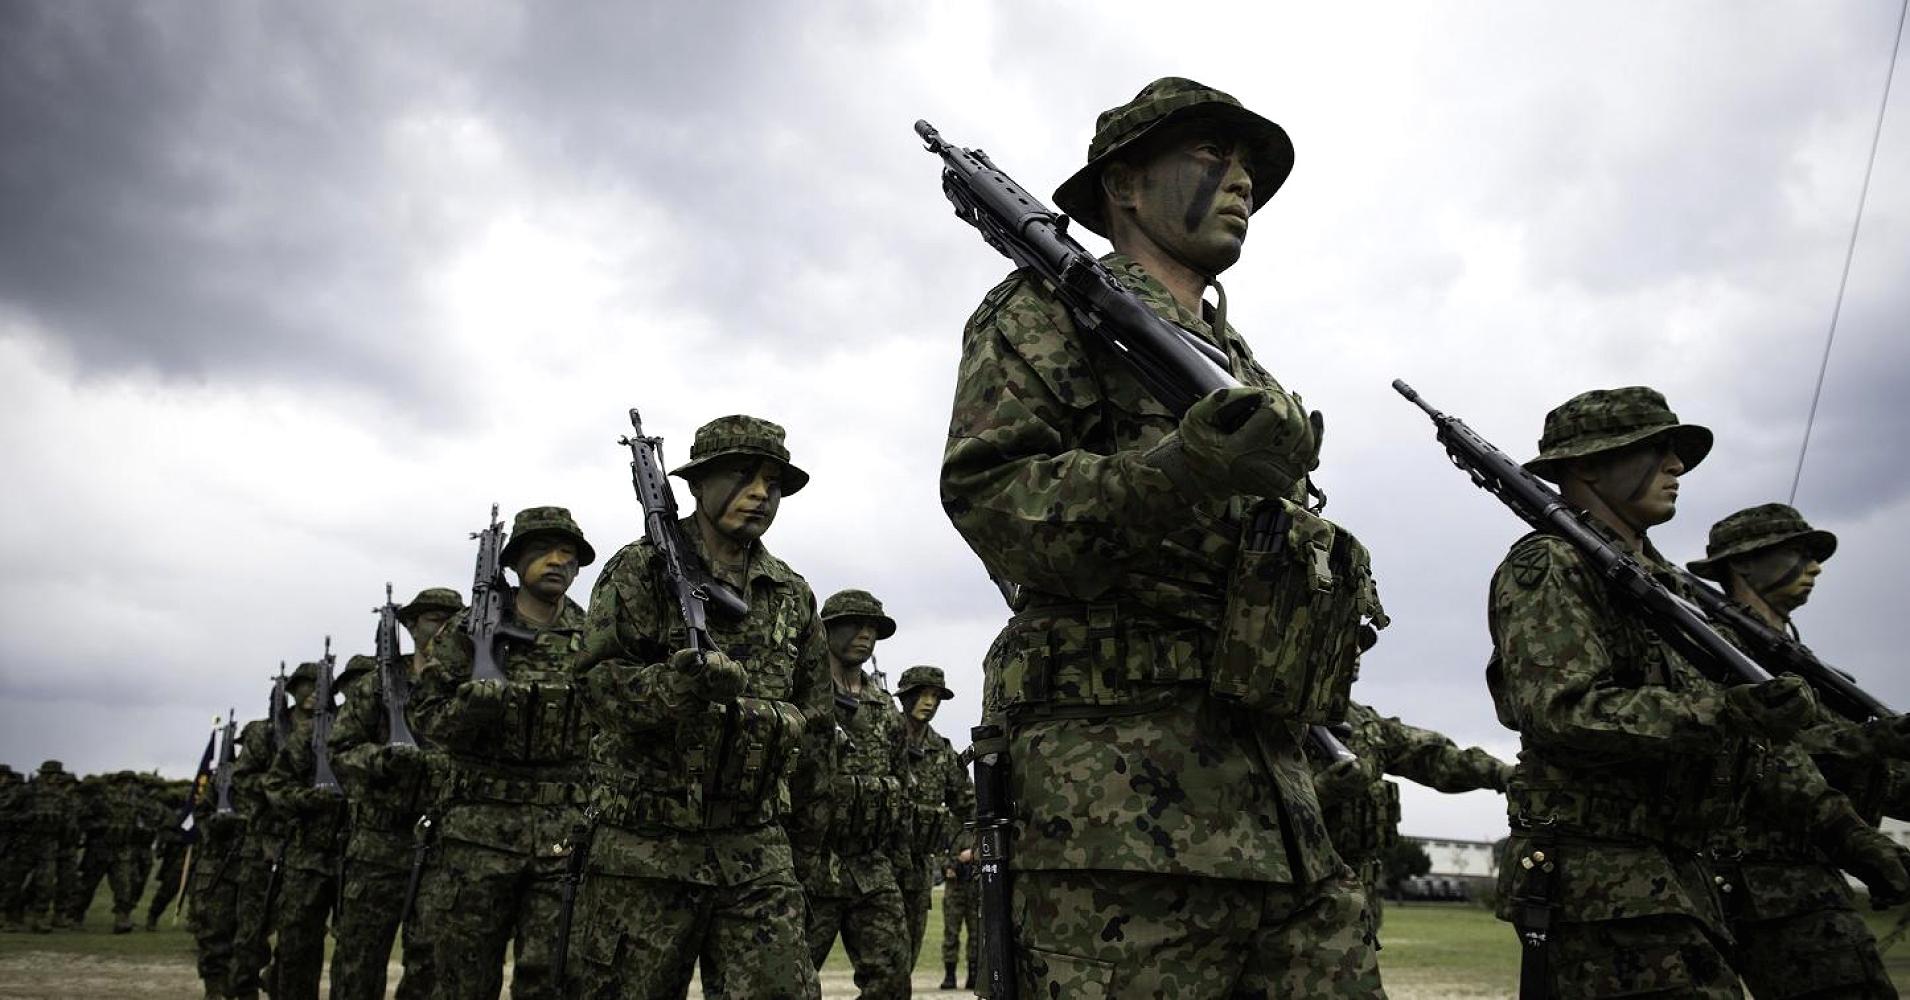 Japan activates first marines since World War II to bolster defenses against China1910 x 1000